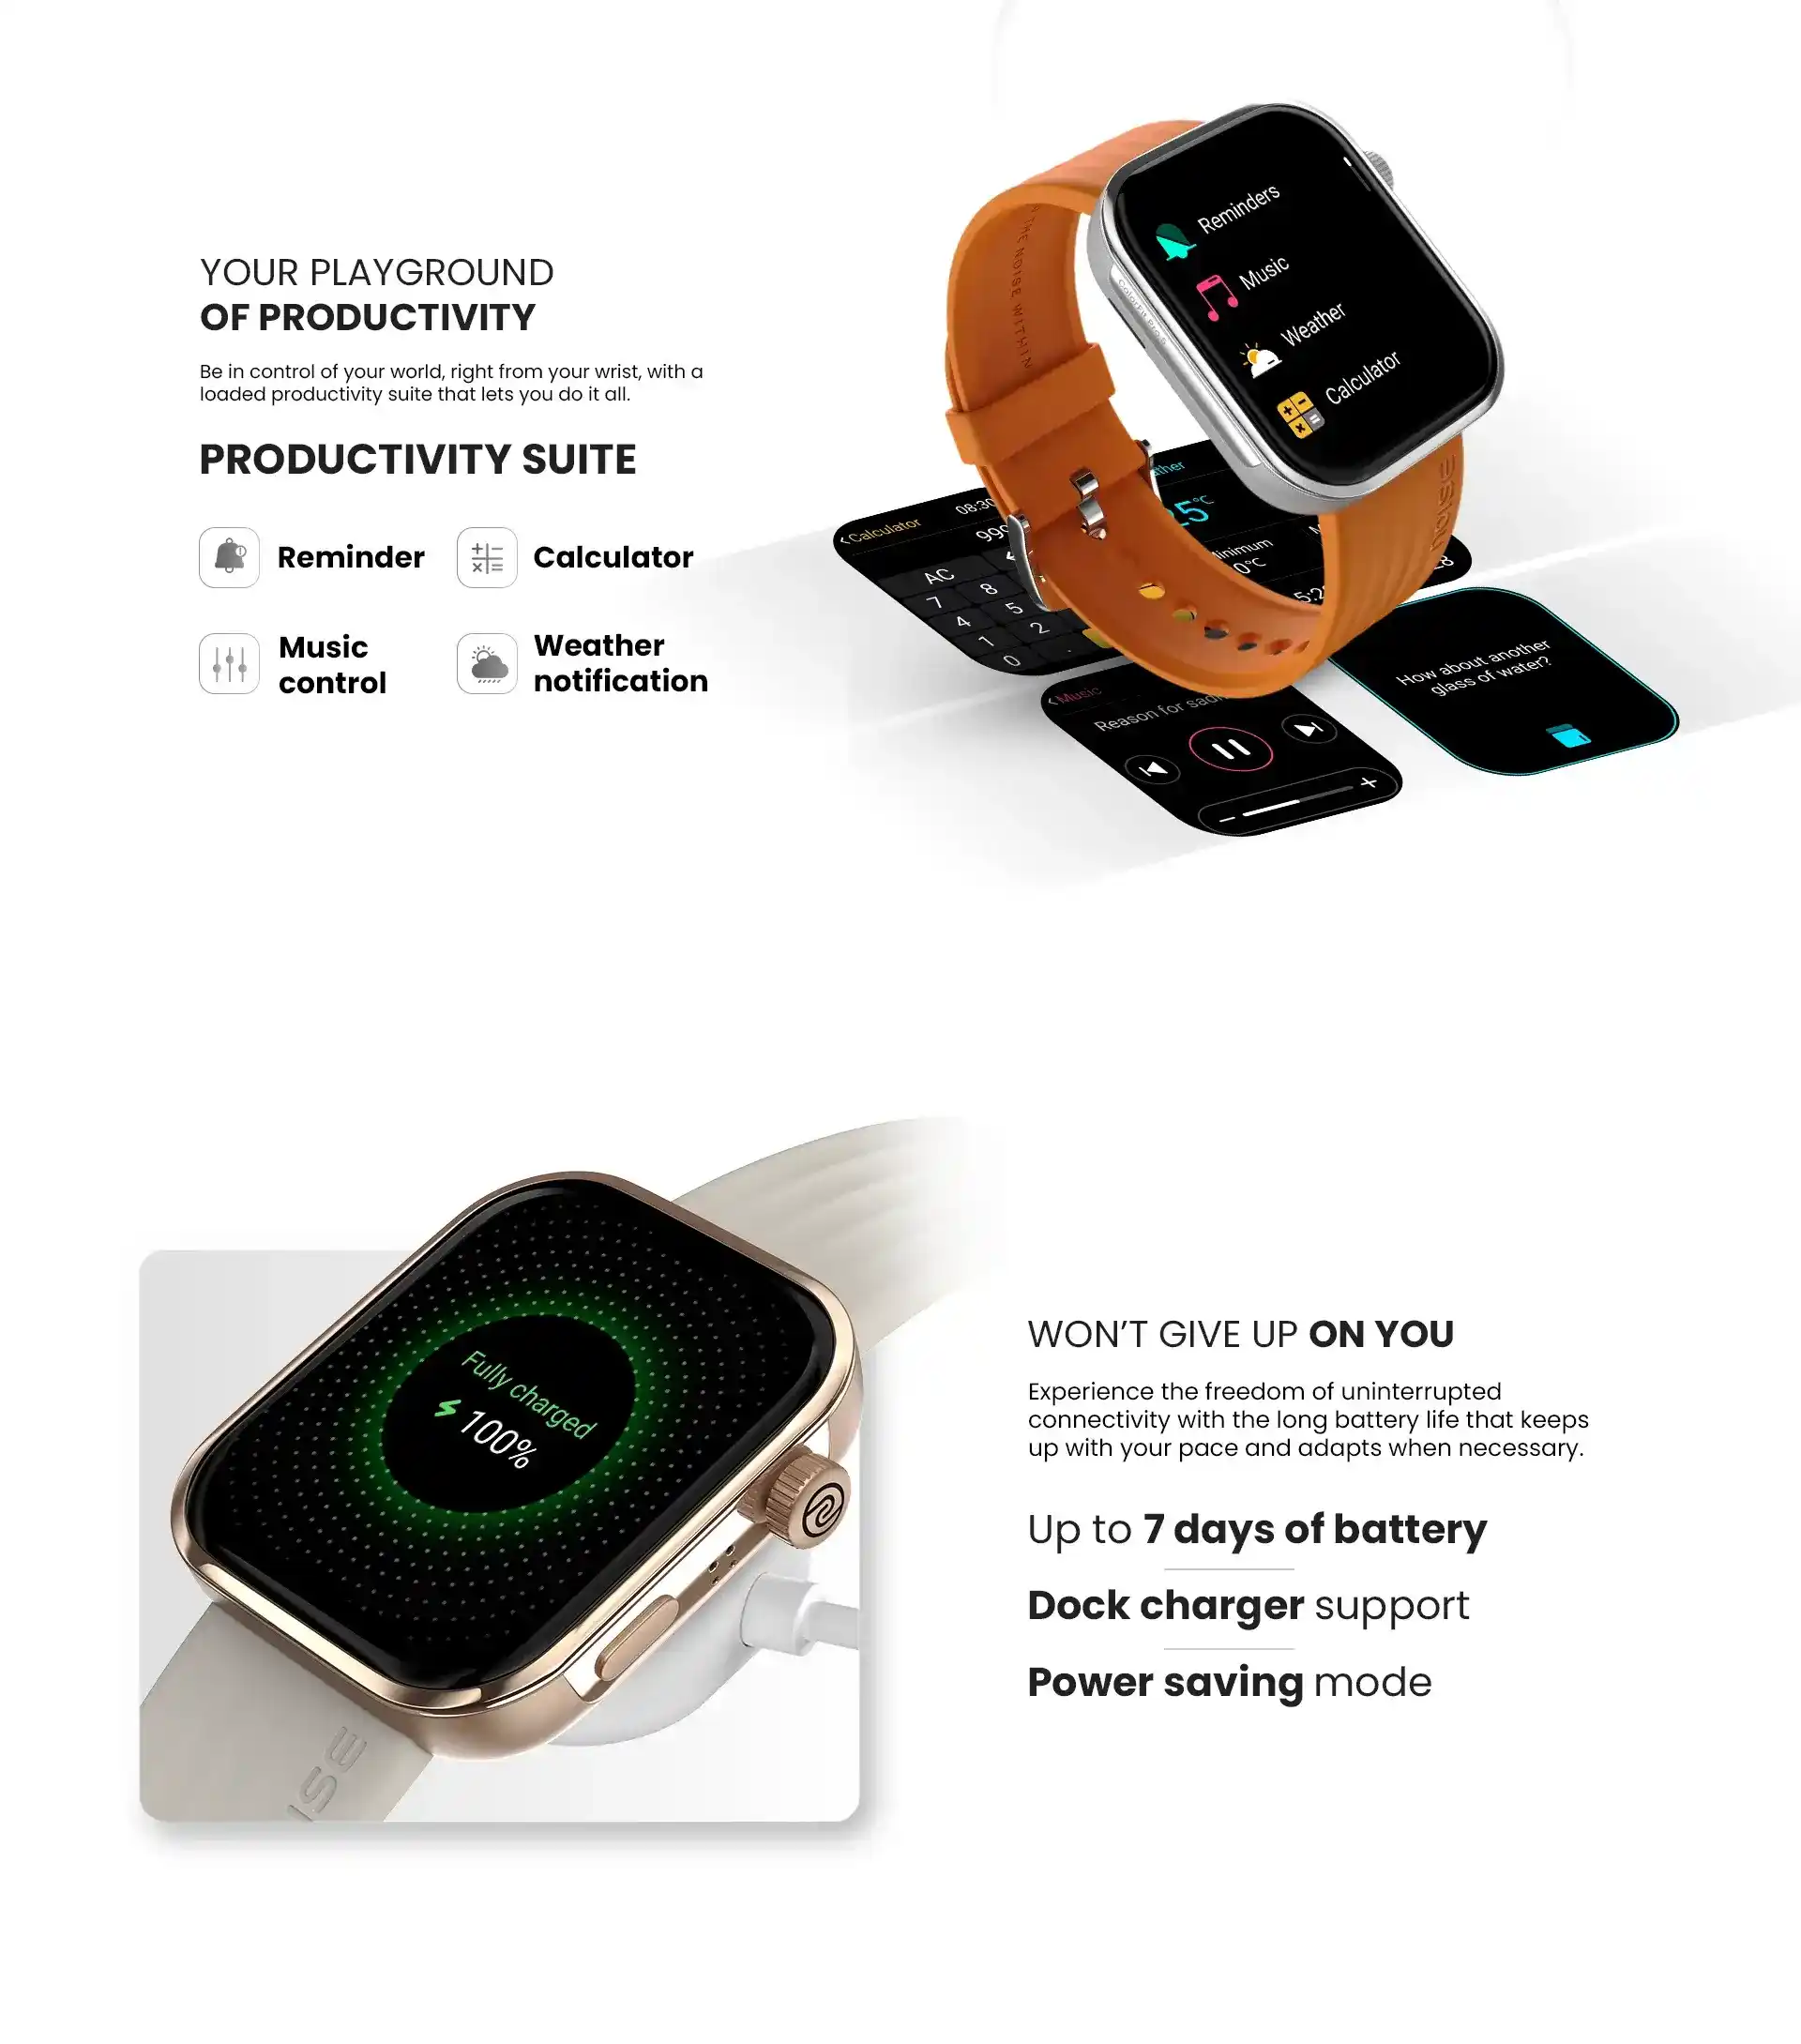 Noise ColorFit Pro 5 Smart Watch | 1.85" AMOLED Display DIY Watch Face